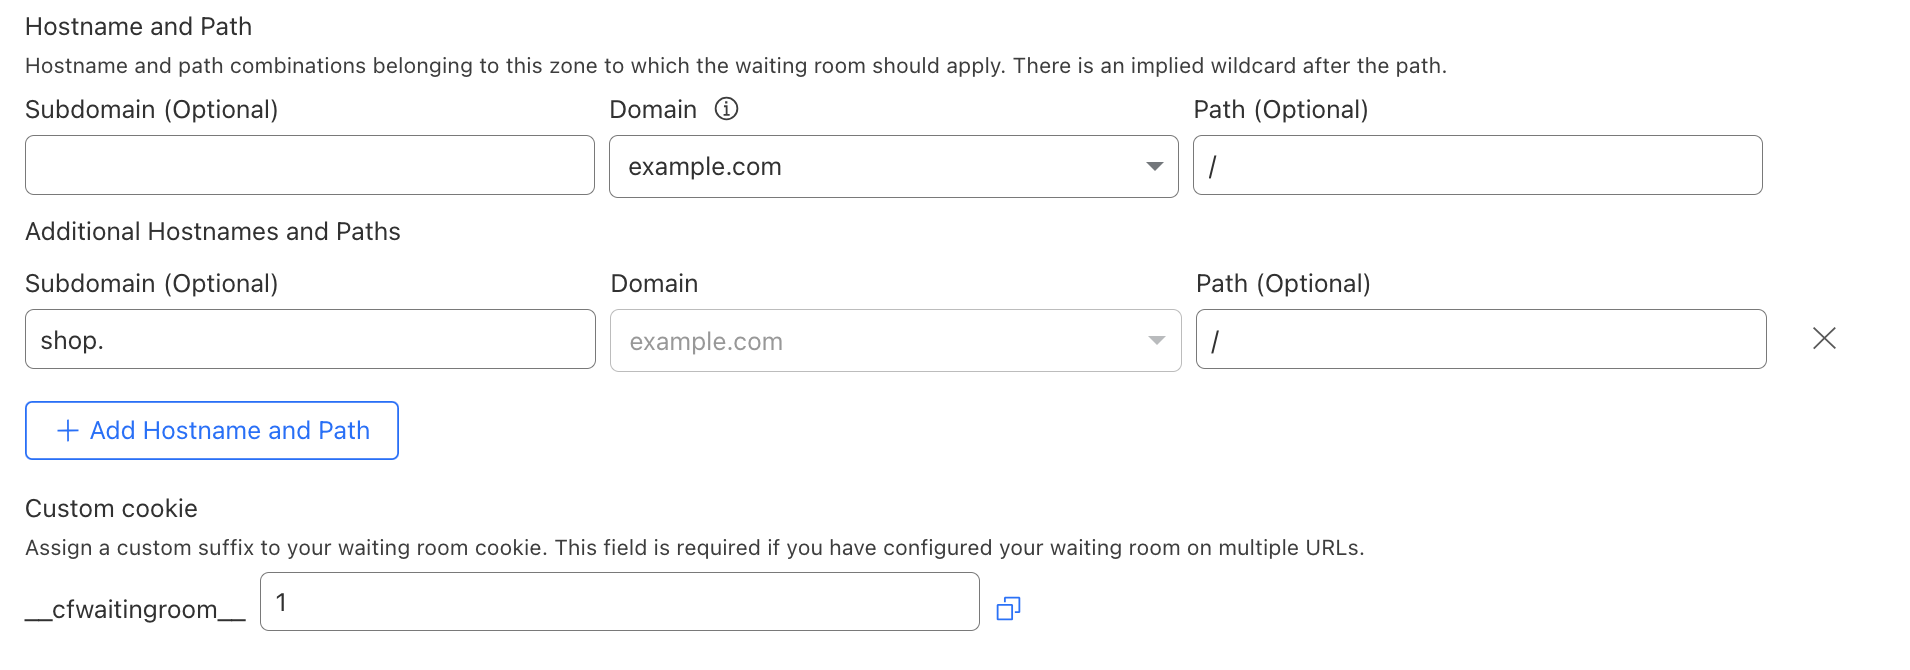 Add multiple hostname and path combinations to your waiting room by selecting Add Hostname and Path